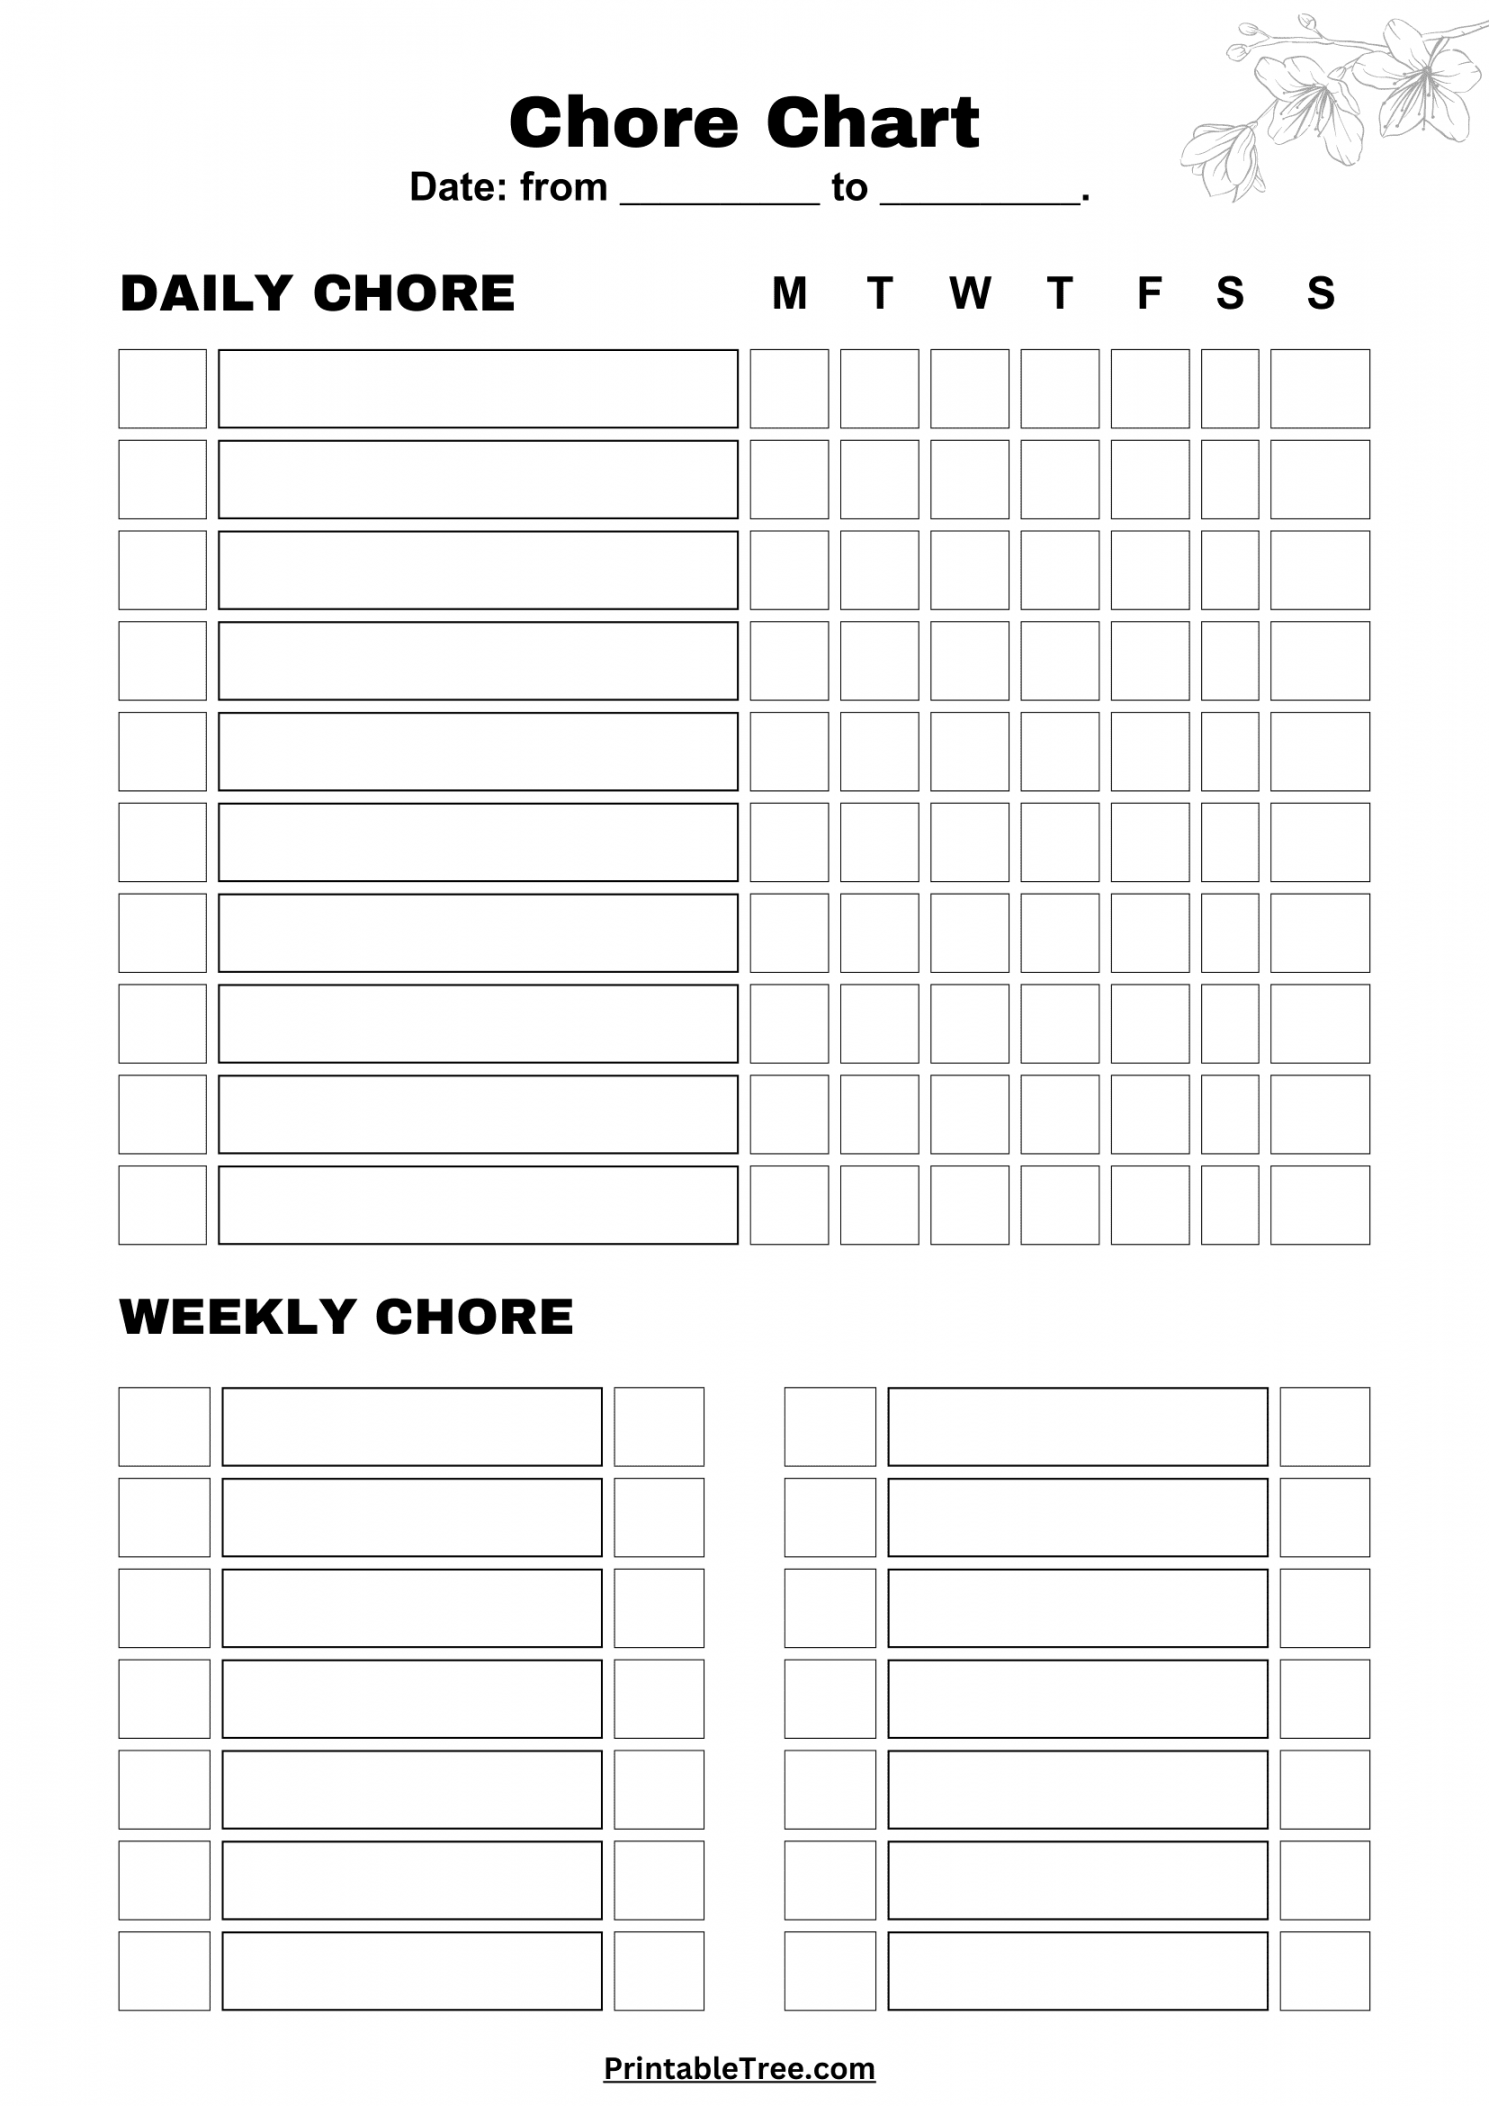 Free Printable Chore Chart PDF Template for Kids - FREE Printables - Free Printable Weekly Chore Chart